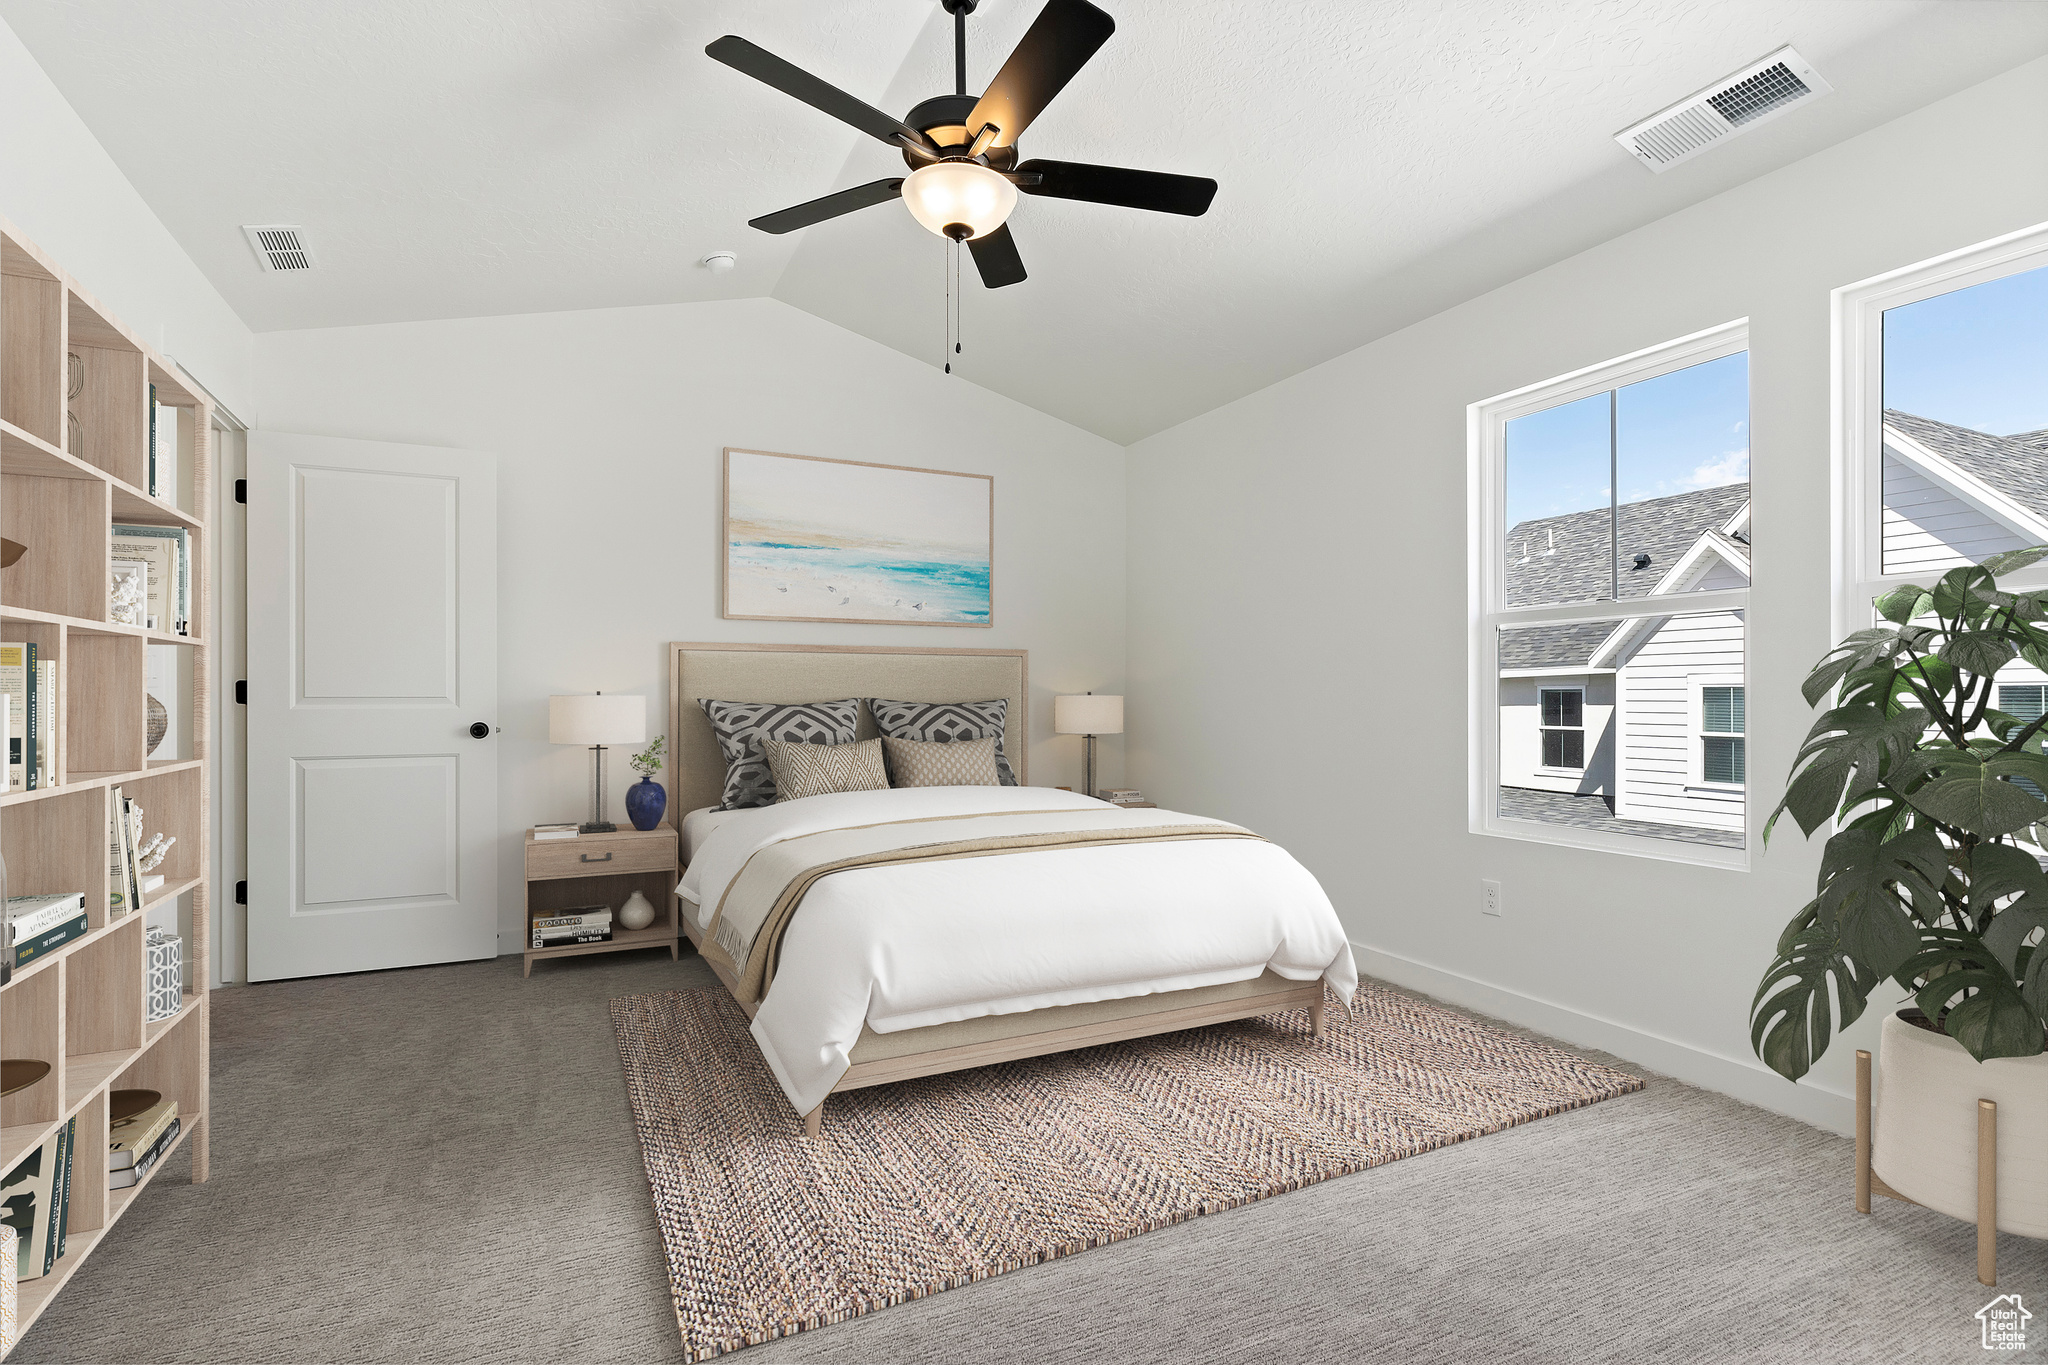 Bedroom featuring vaulted ceiling, dark colored carpet, and ceiling fan